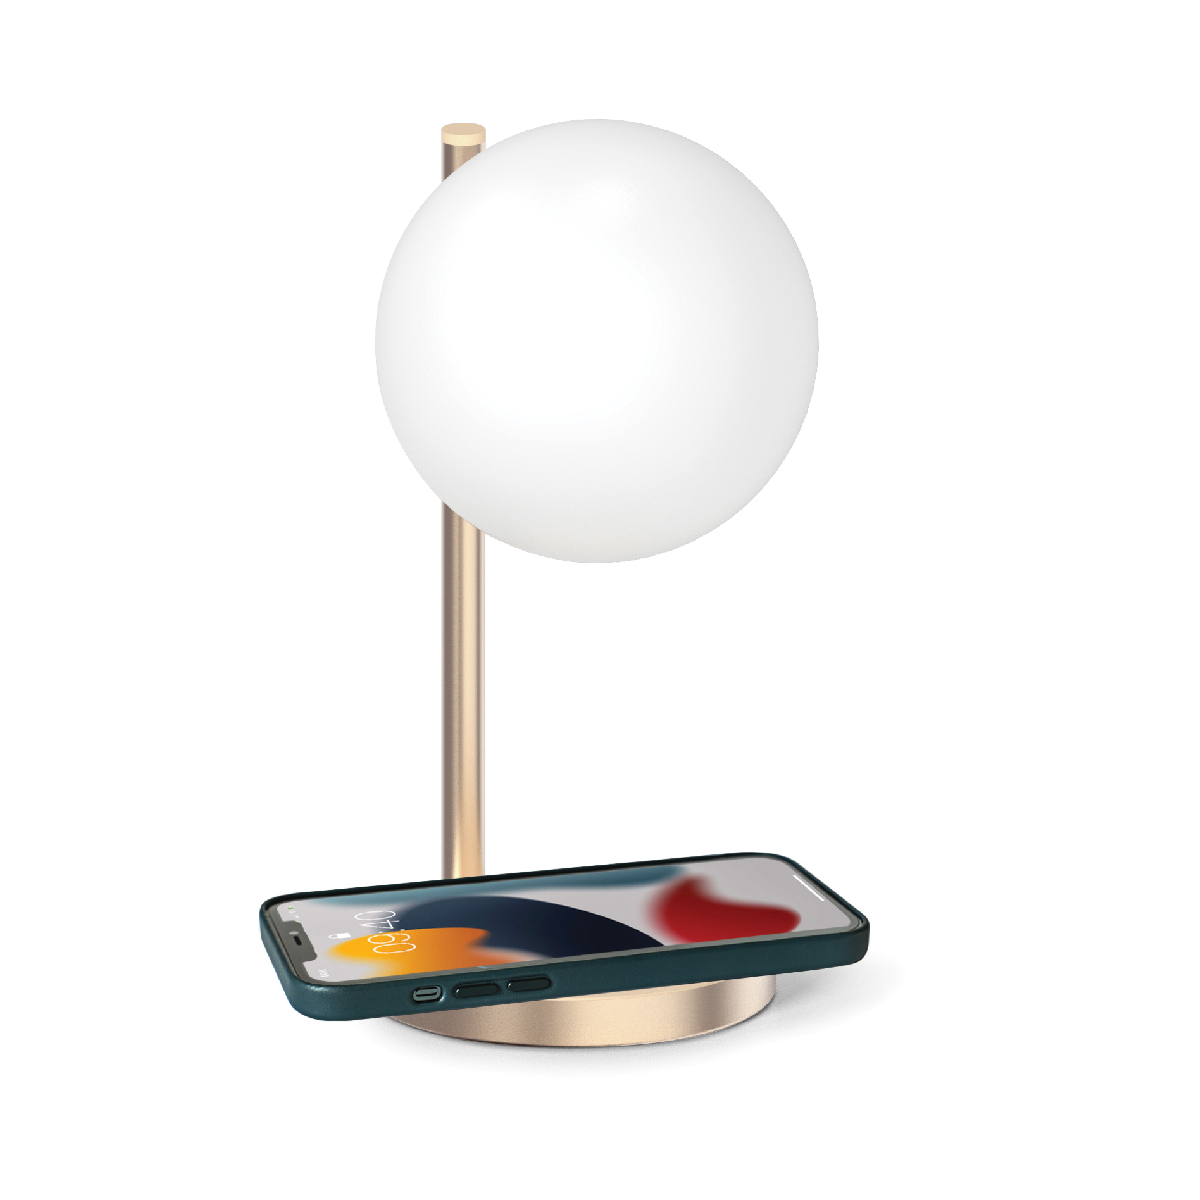 Lexon - Bubble Desk Lamp with Built-in Wireless Charger (Gold)